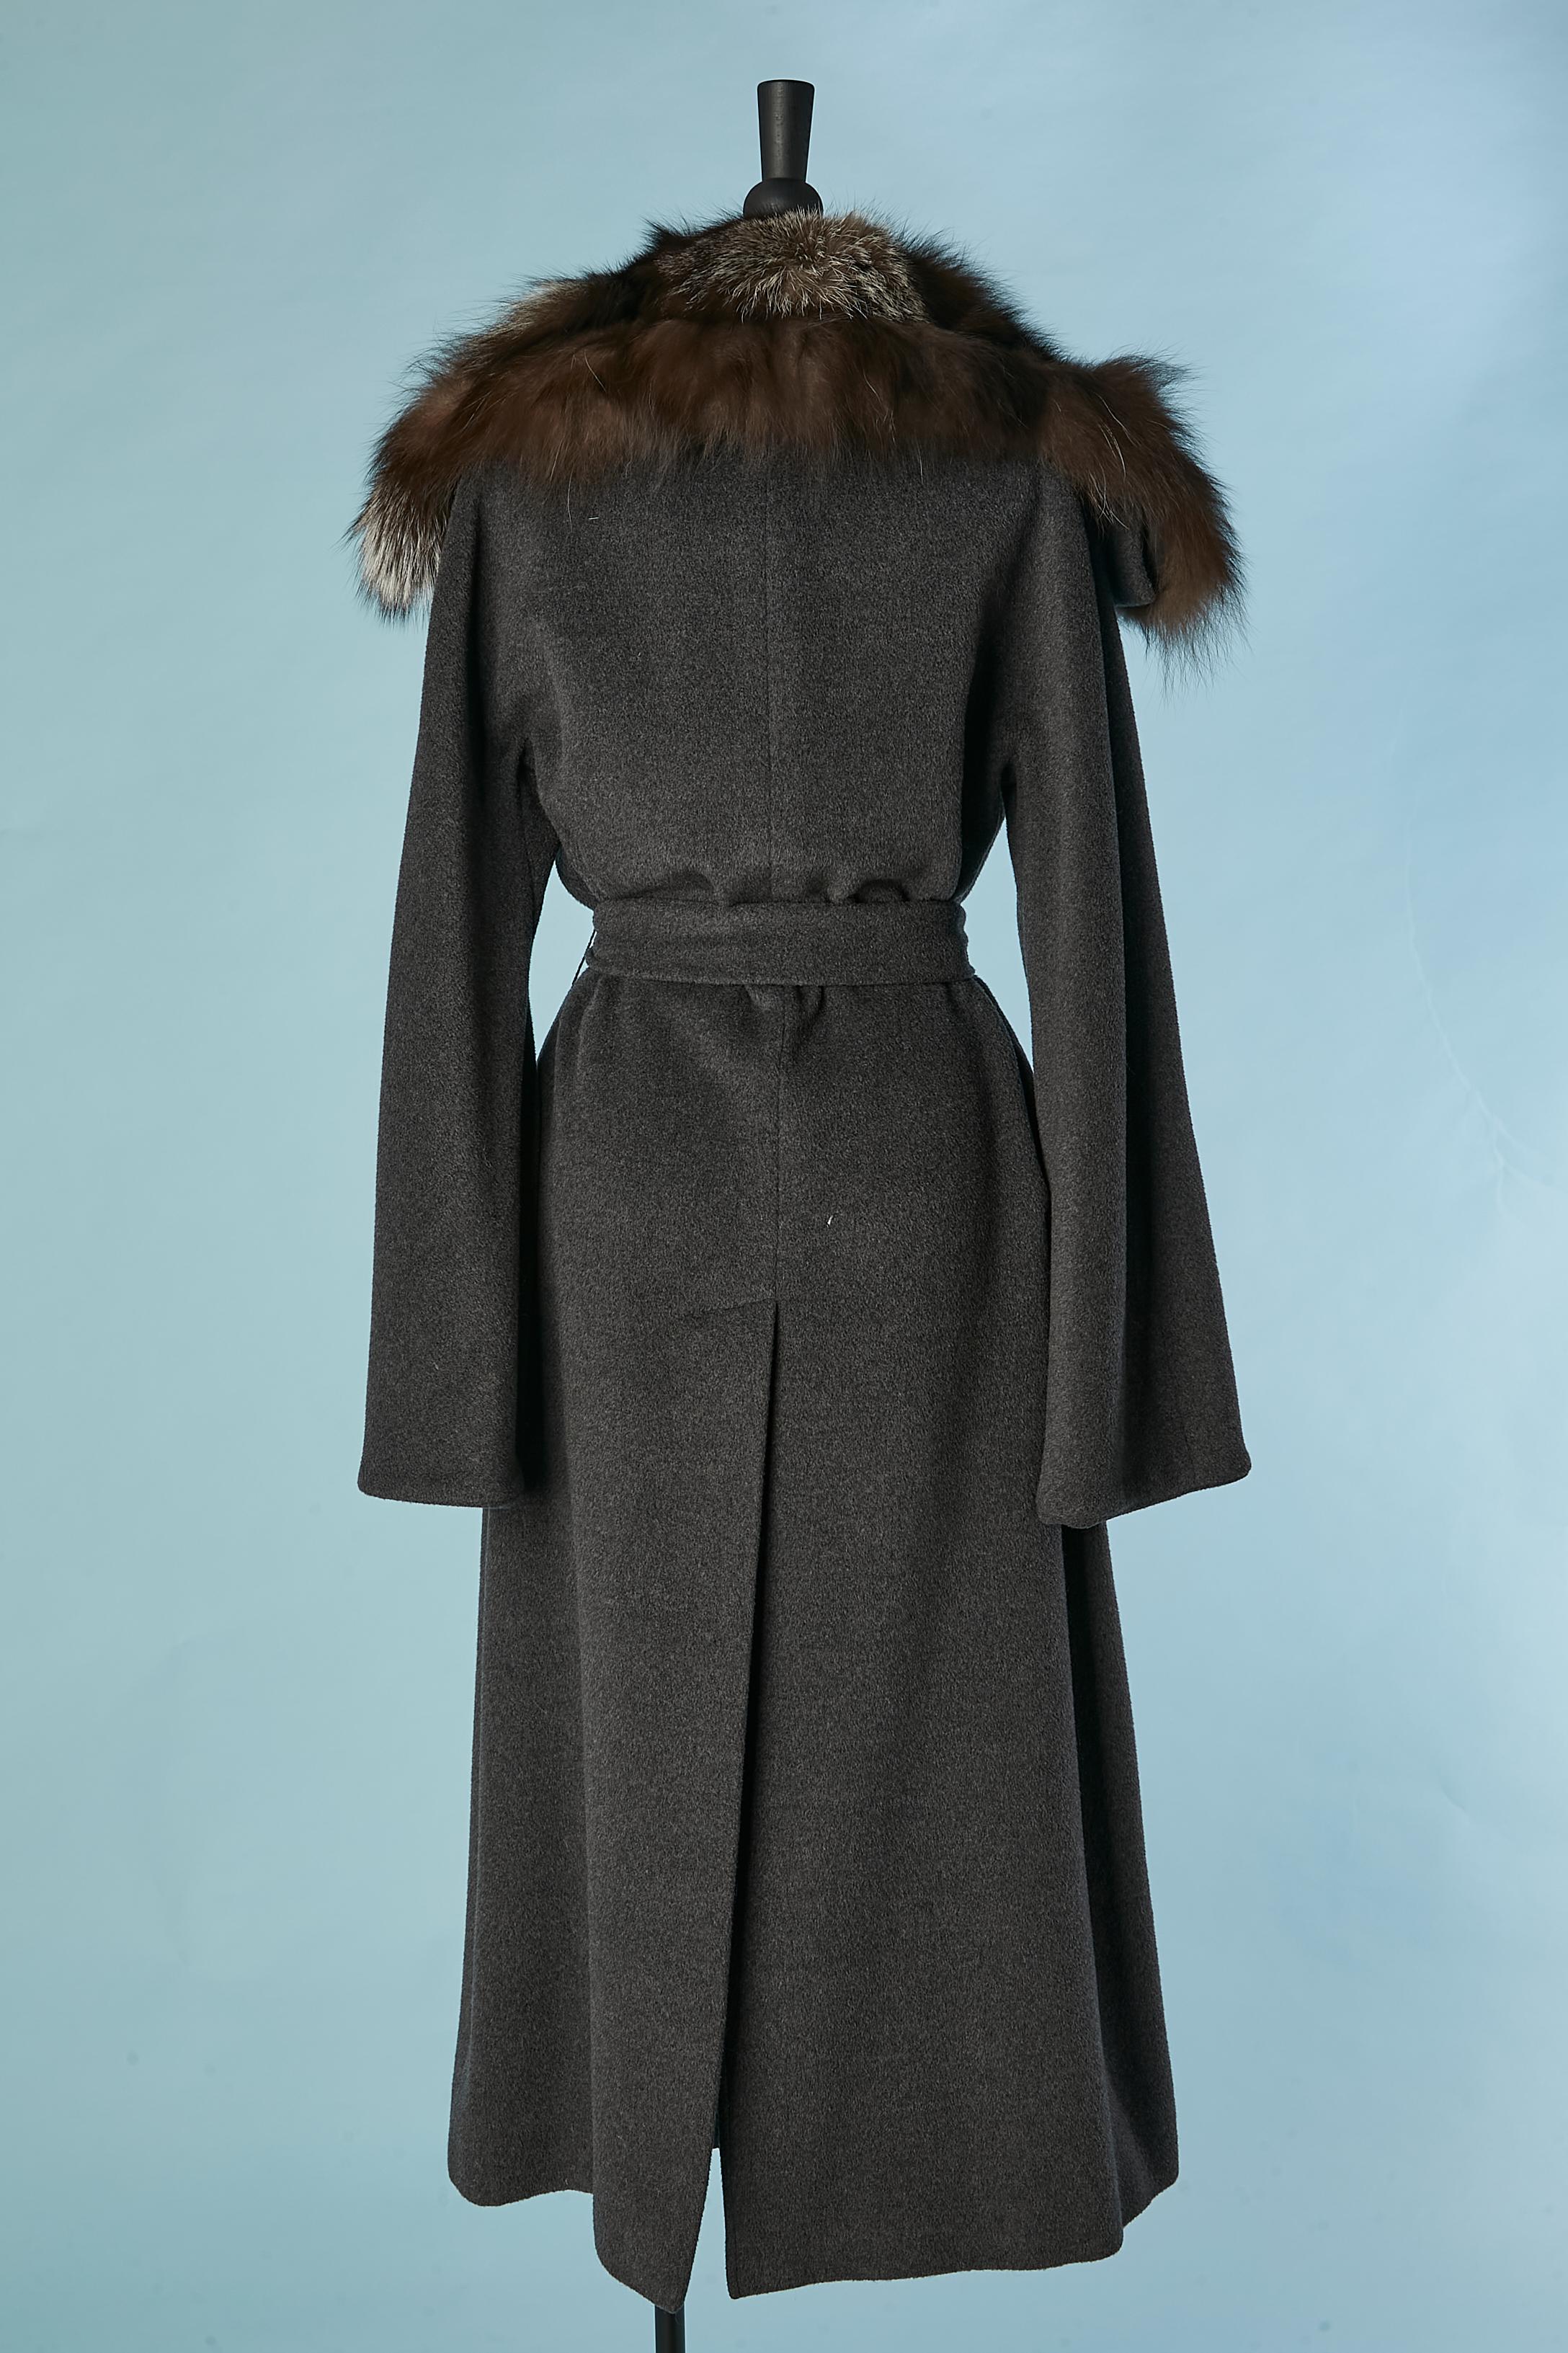 Grey single breasted wool coat with fur collar and belt CERRUTI 1881  For Sale 3